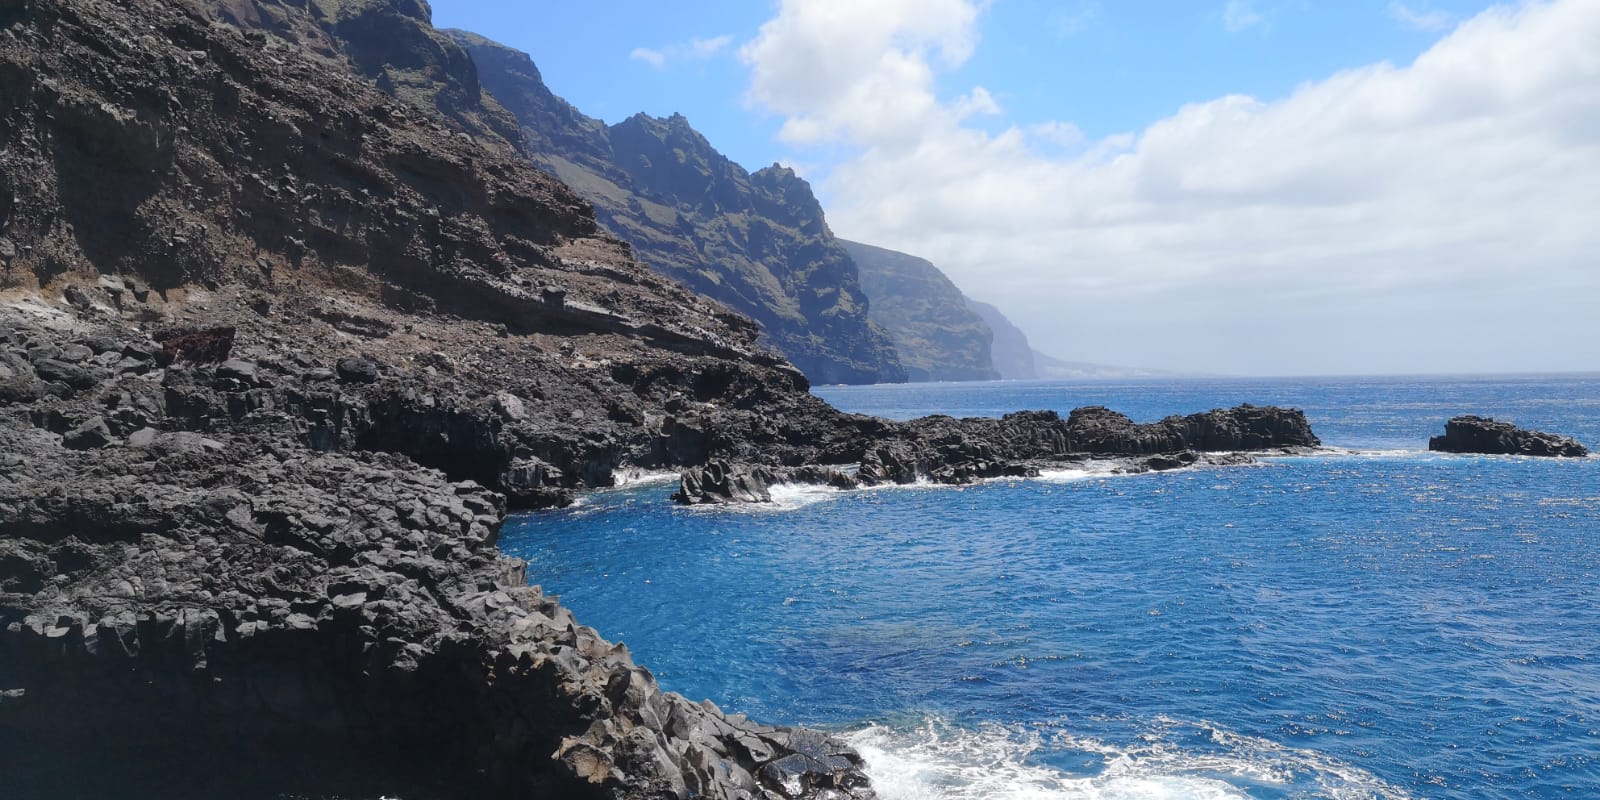 Punta de Teno, in the northwest of Tenerife, has some remarkable natural pools